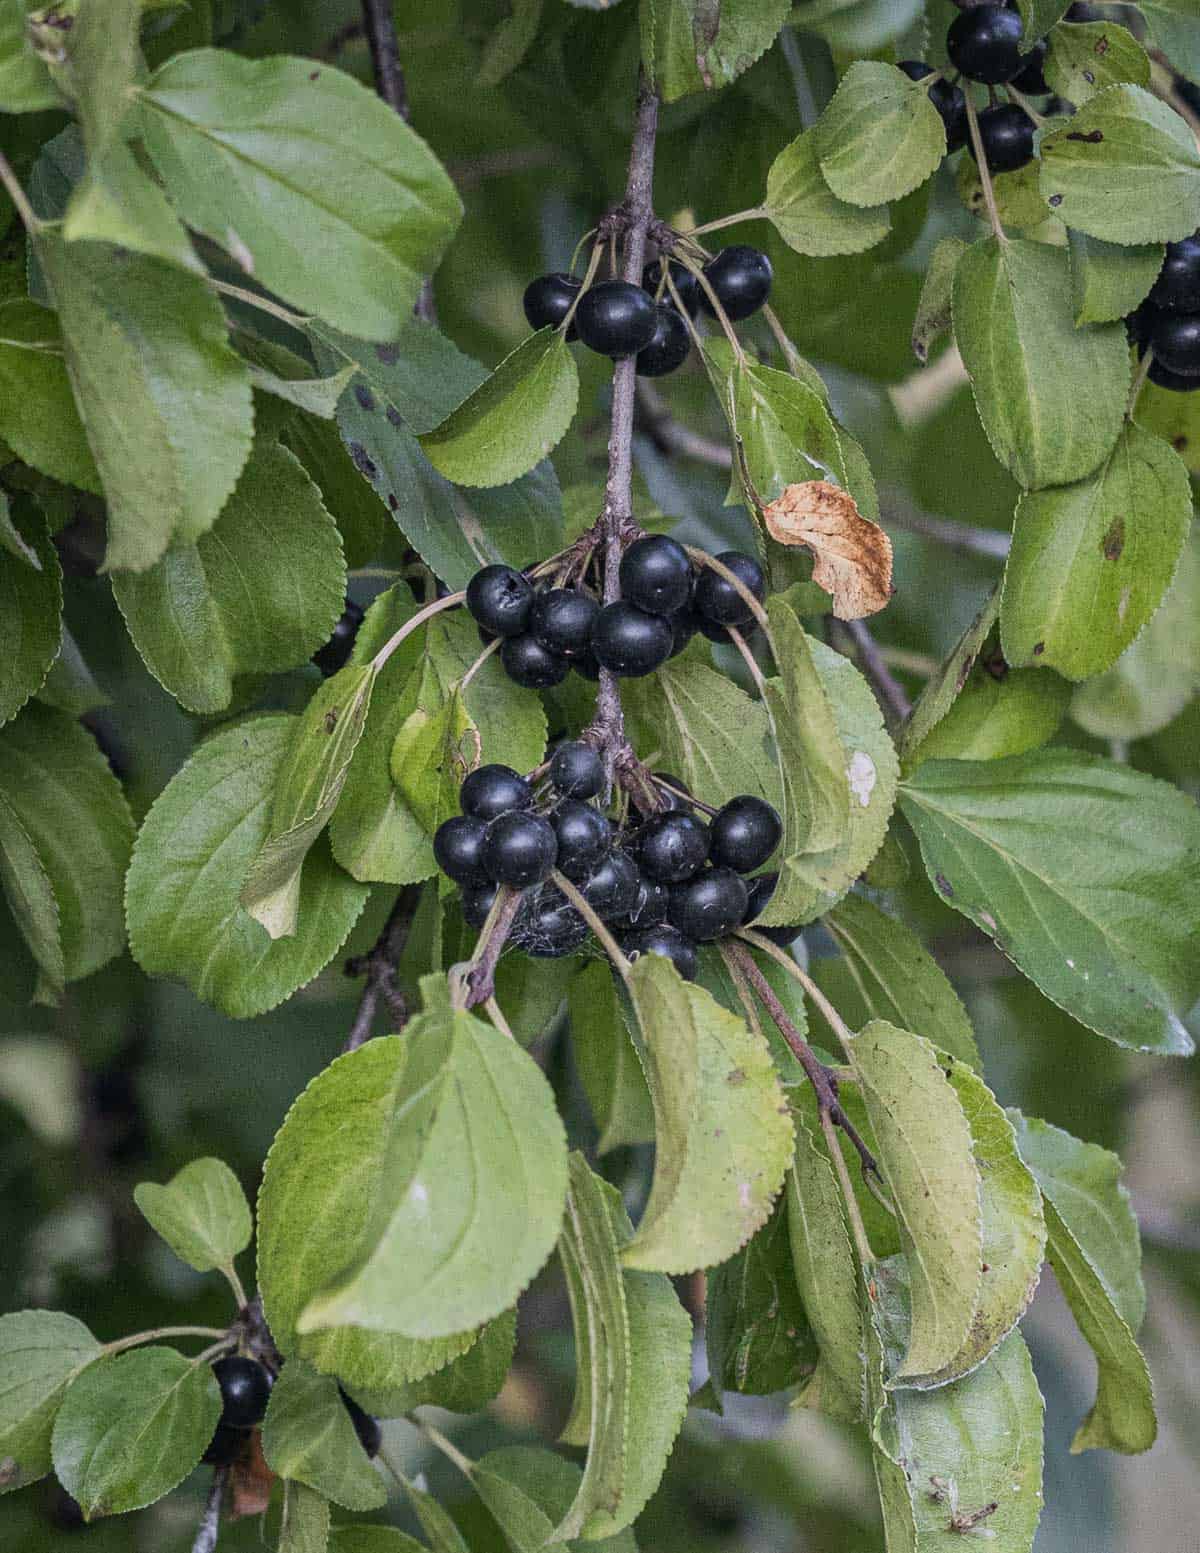 A close up image of common buckthorn berries growing on a branch (Rhamnus cathartica) .